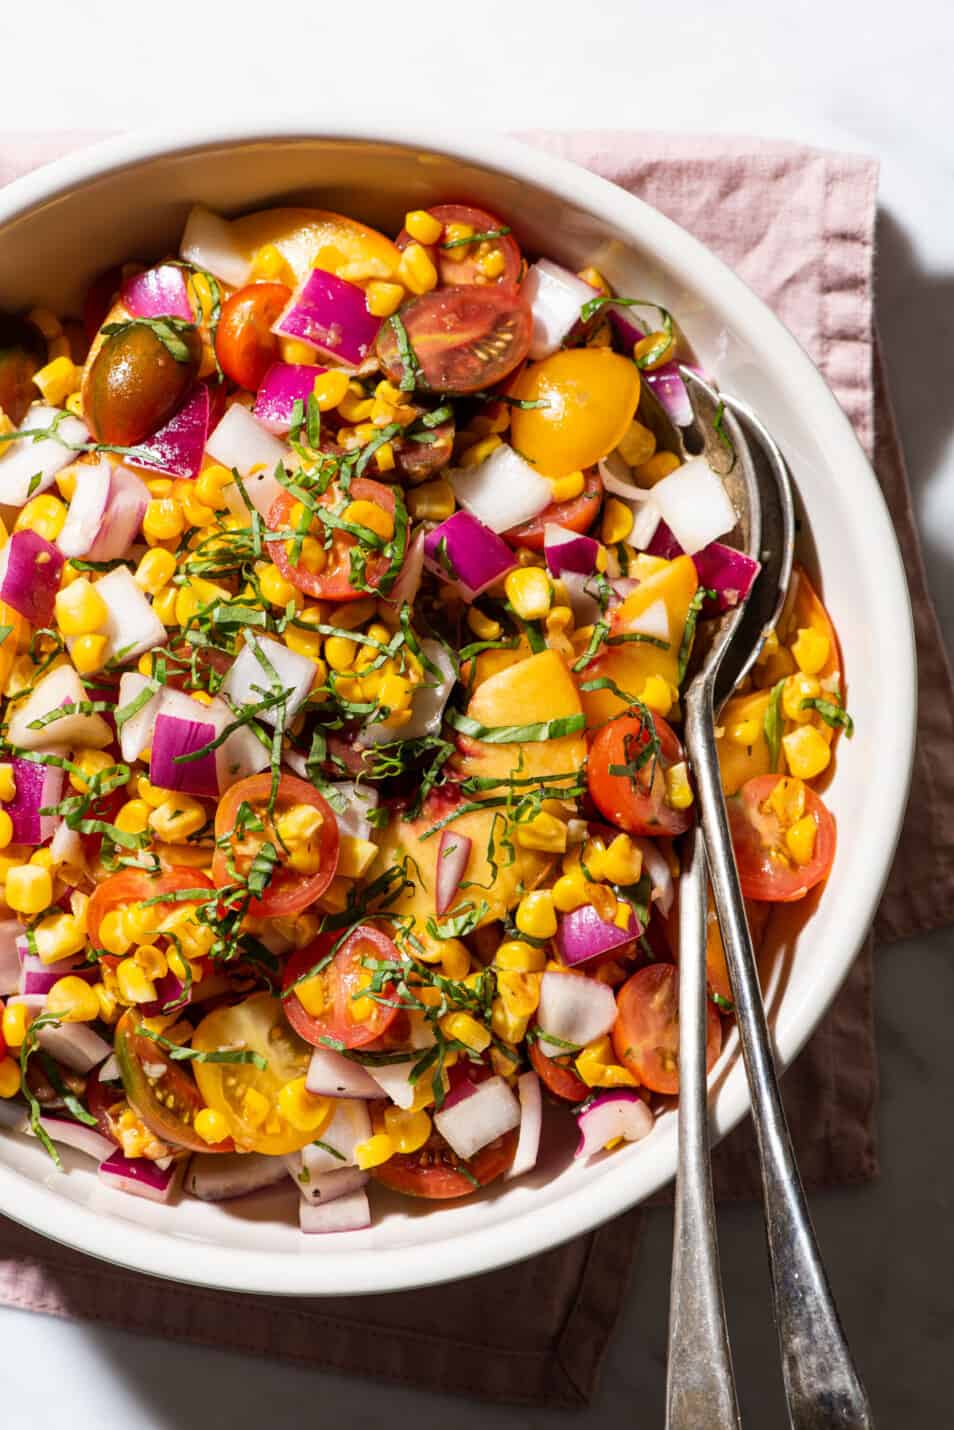 A healthy summer salad consisting of tomatoes, peaches, red onion, corn, and basil.